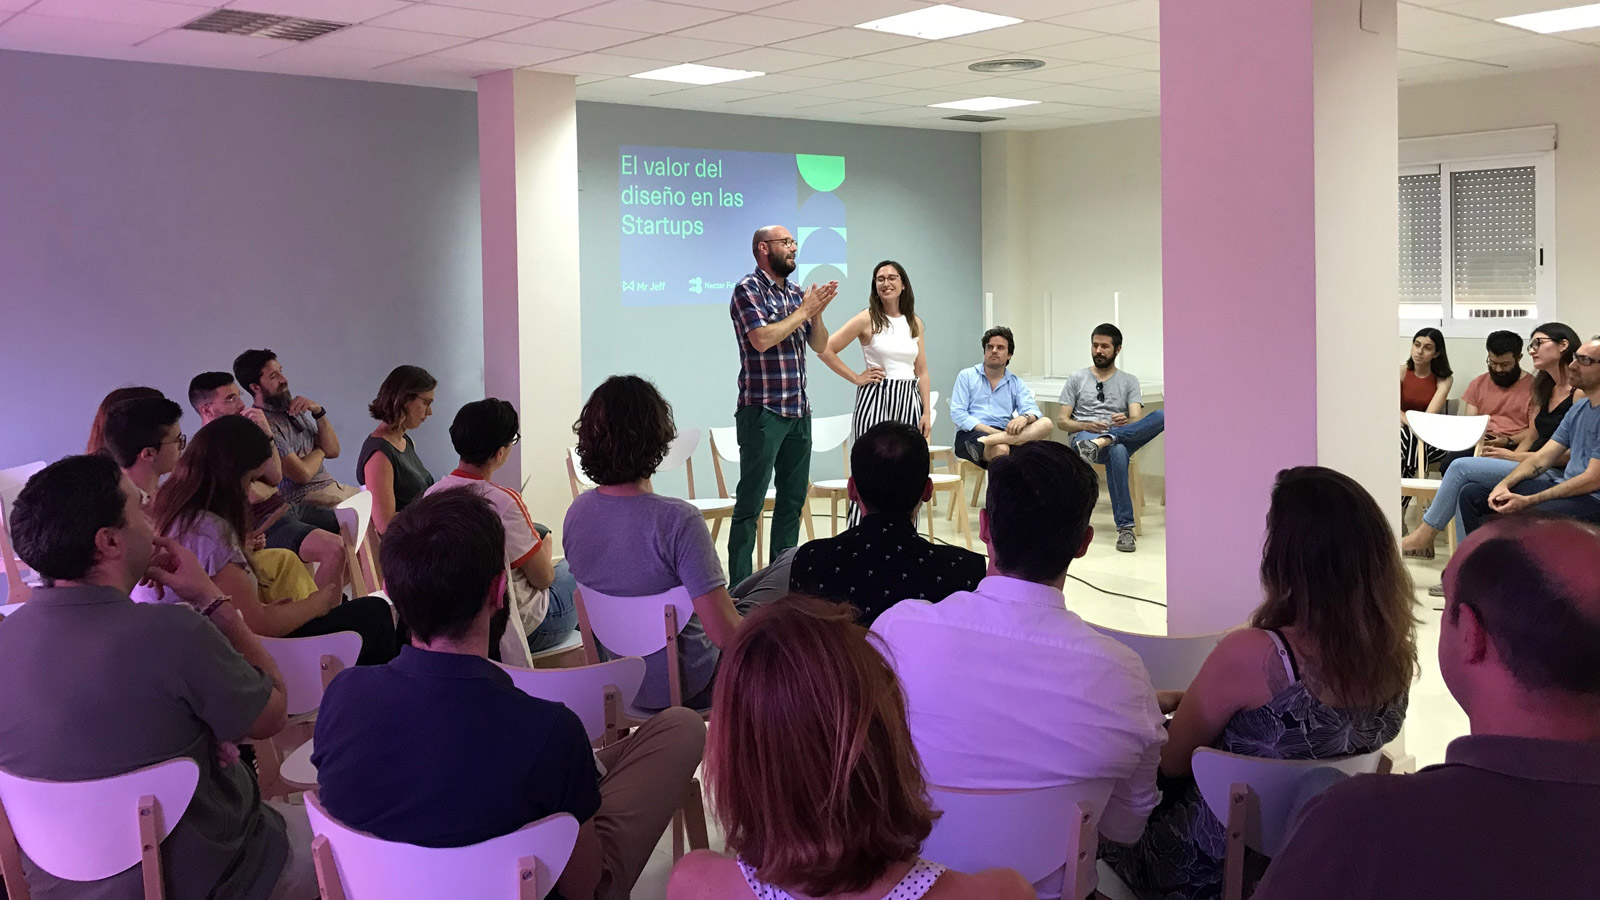 The value of design in startups, a fishbowl organized by Mr. Jeff and Nectar